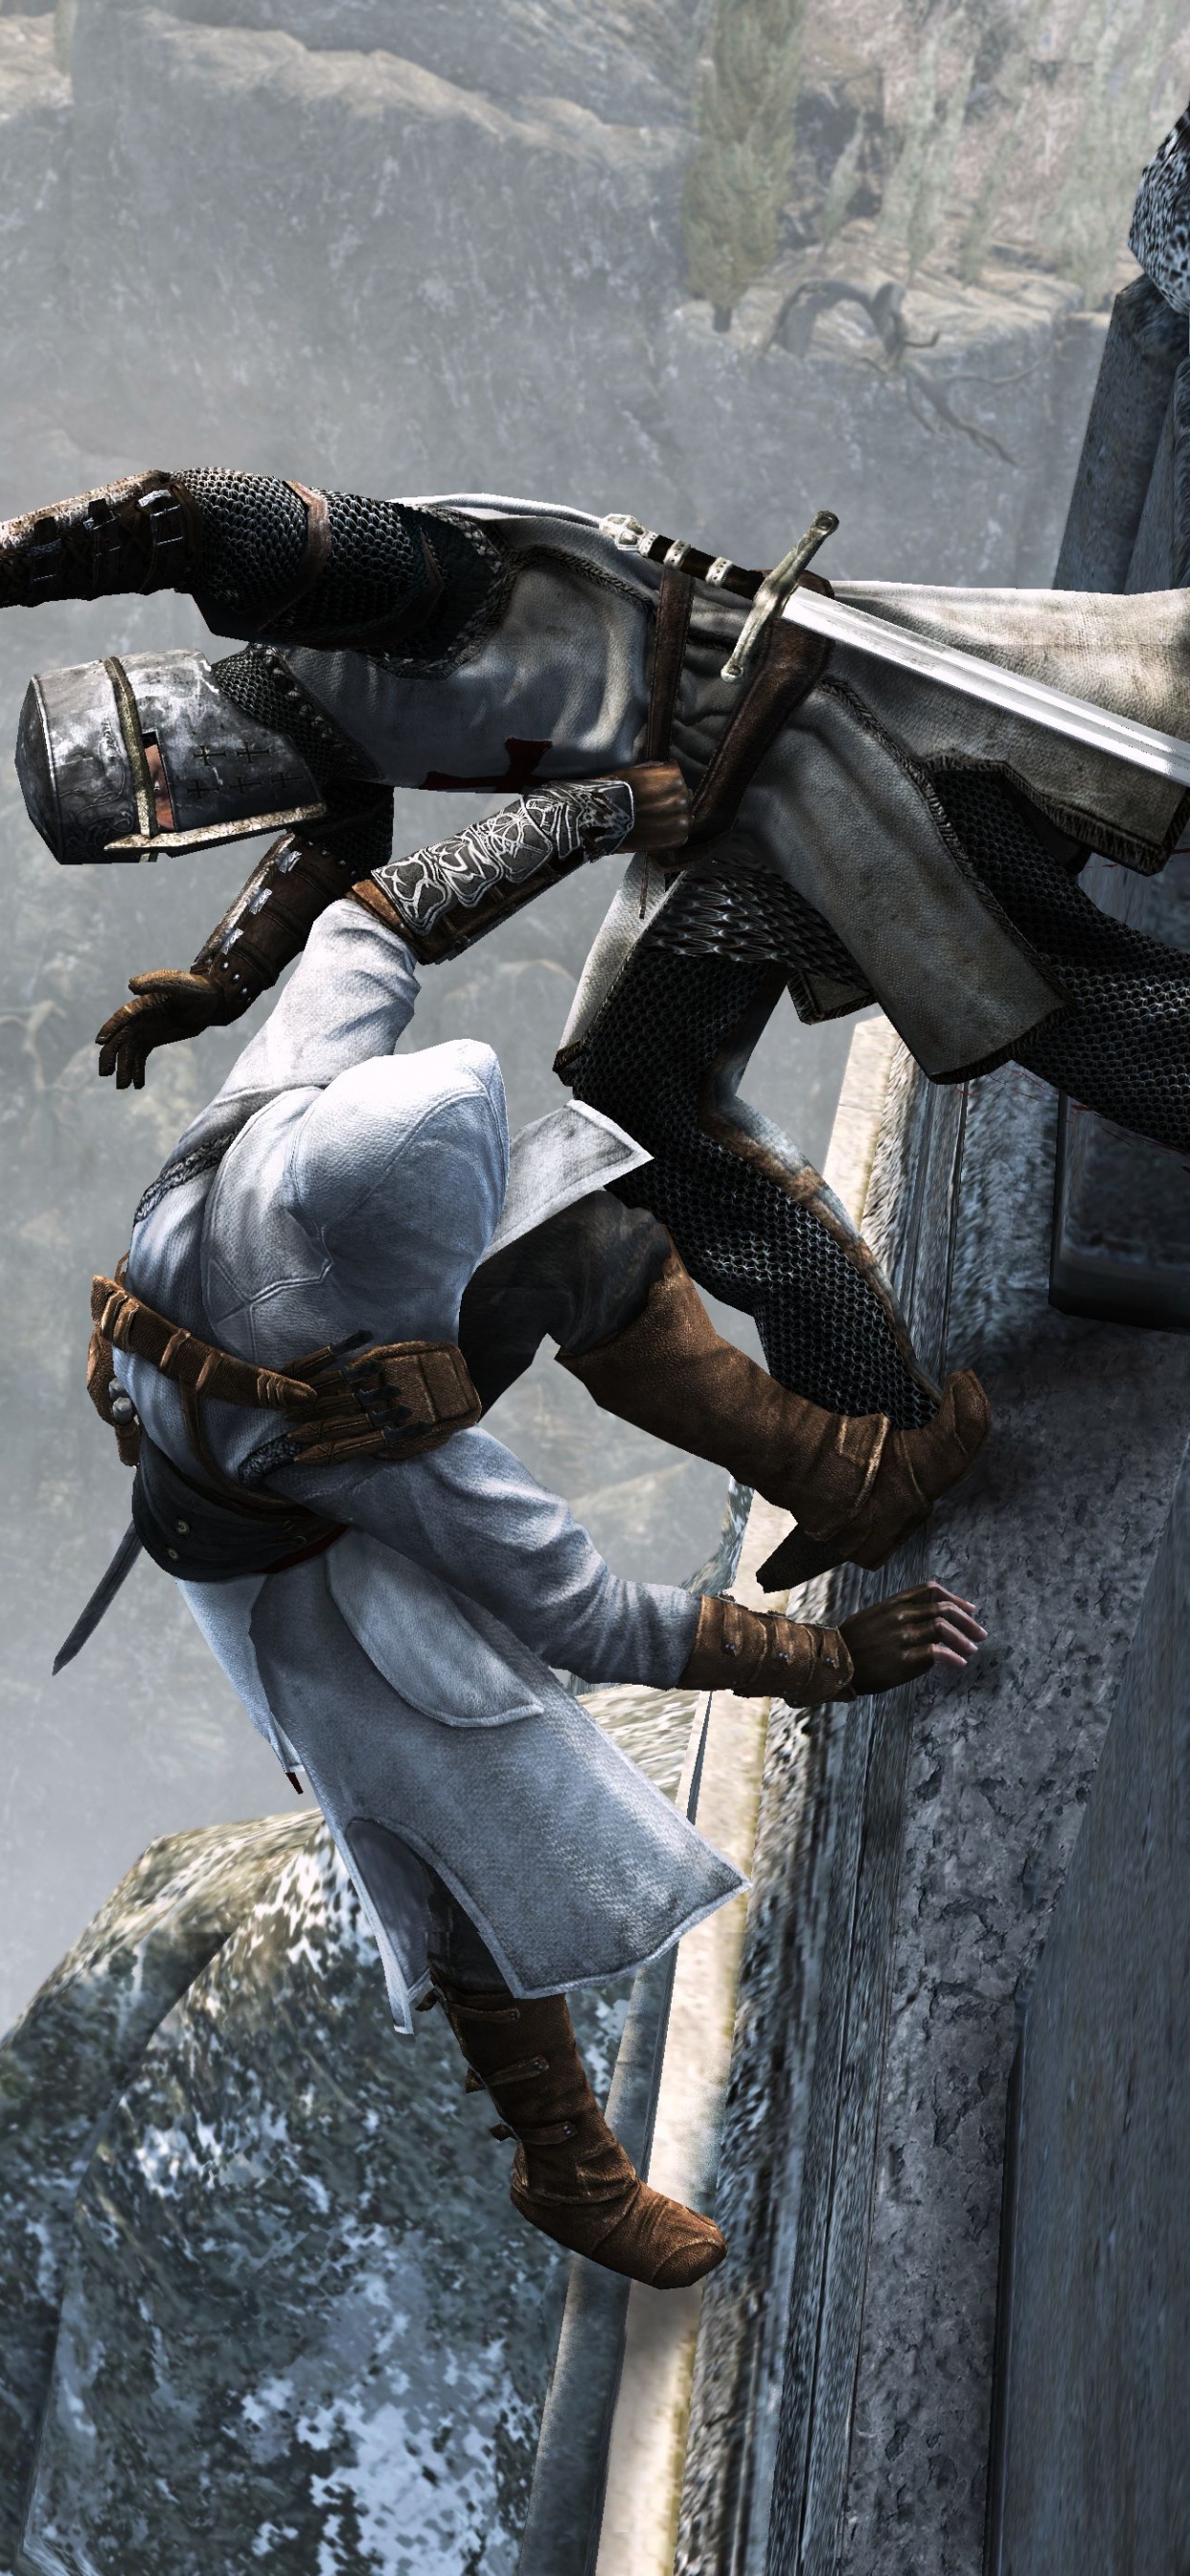 Assassins Creed, Assassins Creed Revelations, Assassins Creed Brotherhood, Assassins Creed III, Ezio Auditore. Wallpaper in 1242x2688 Resolution